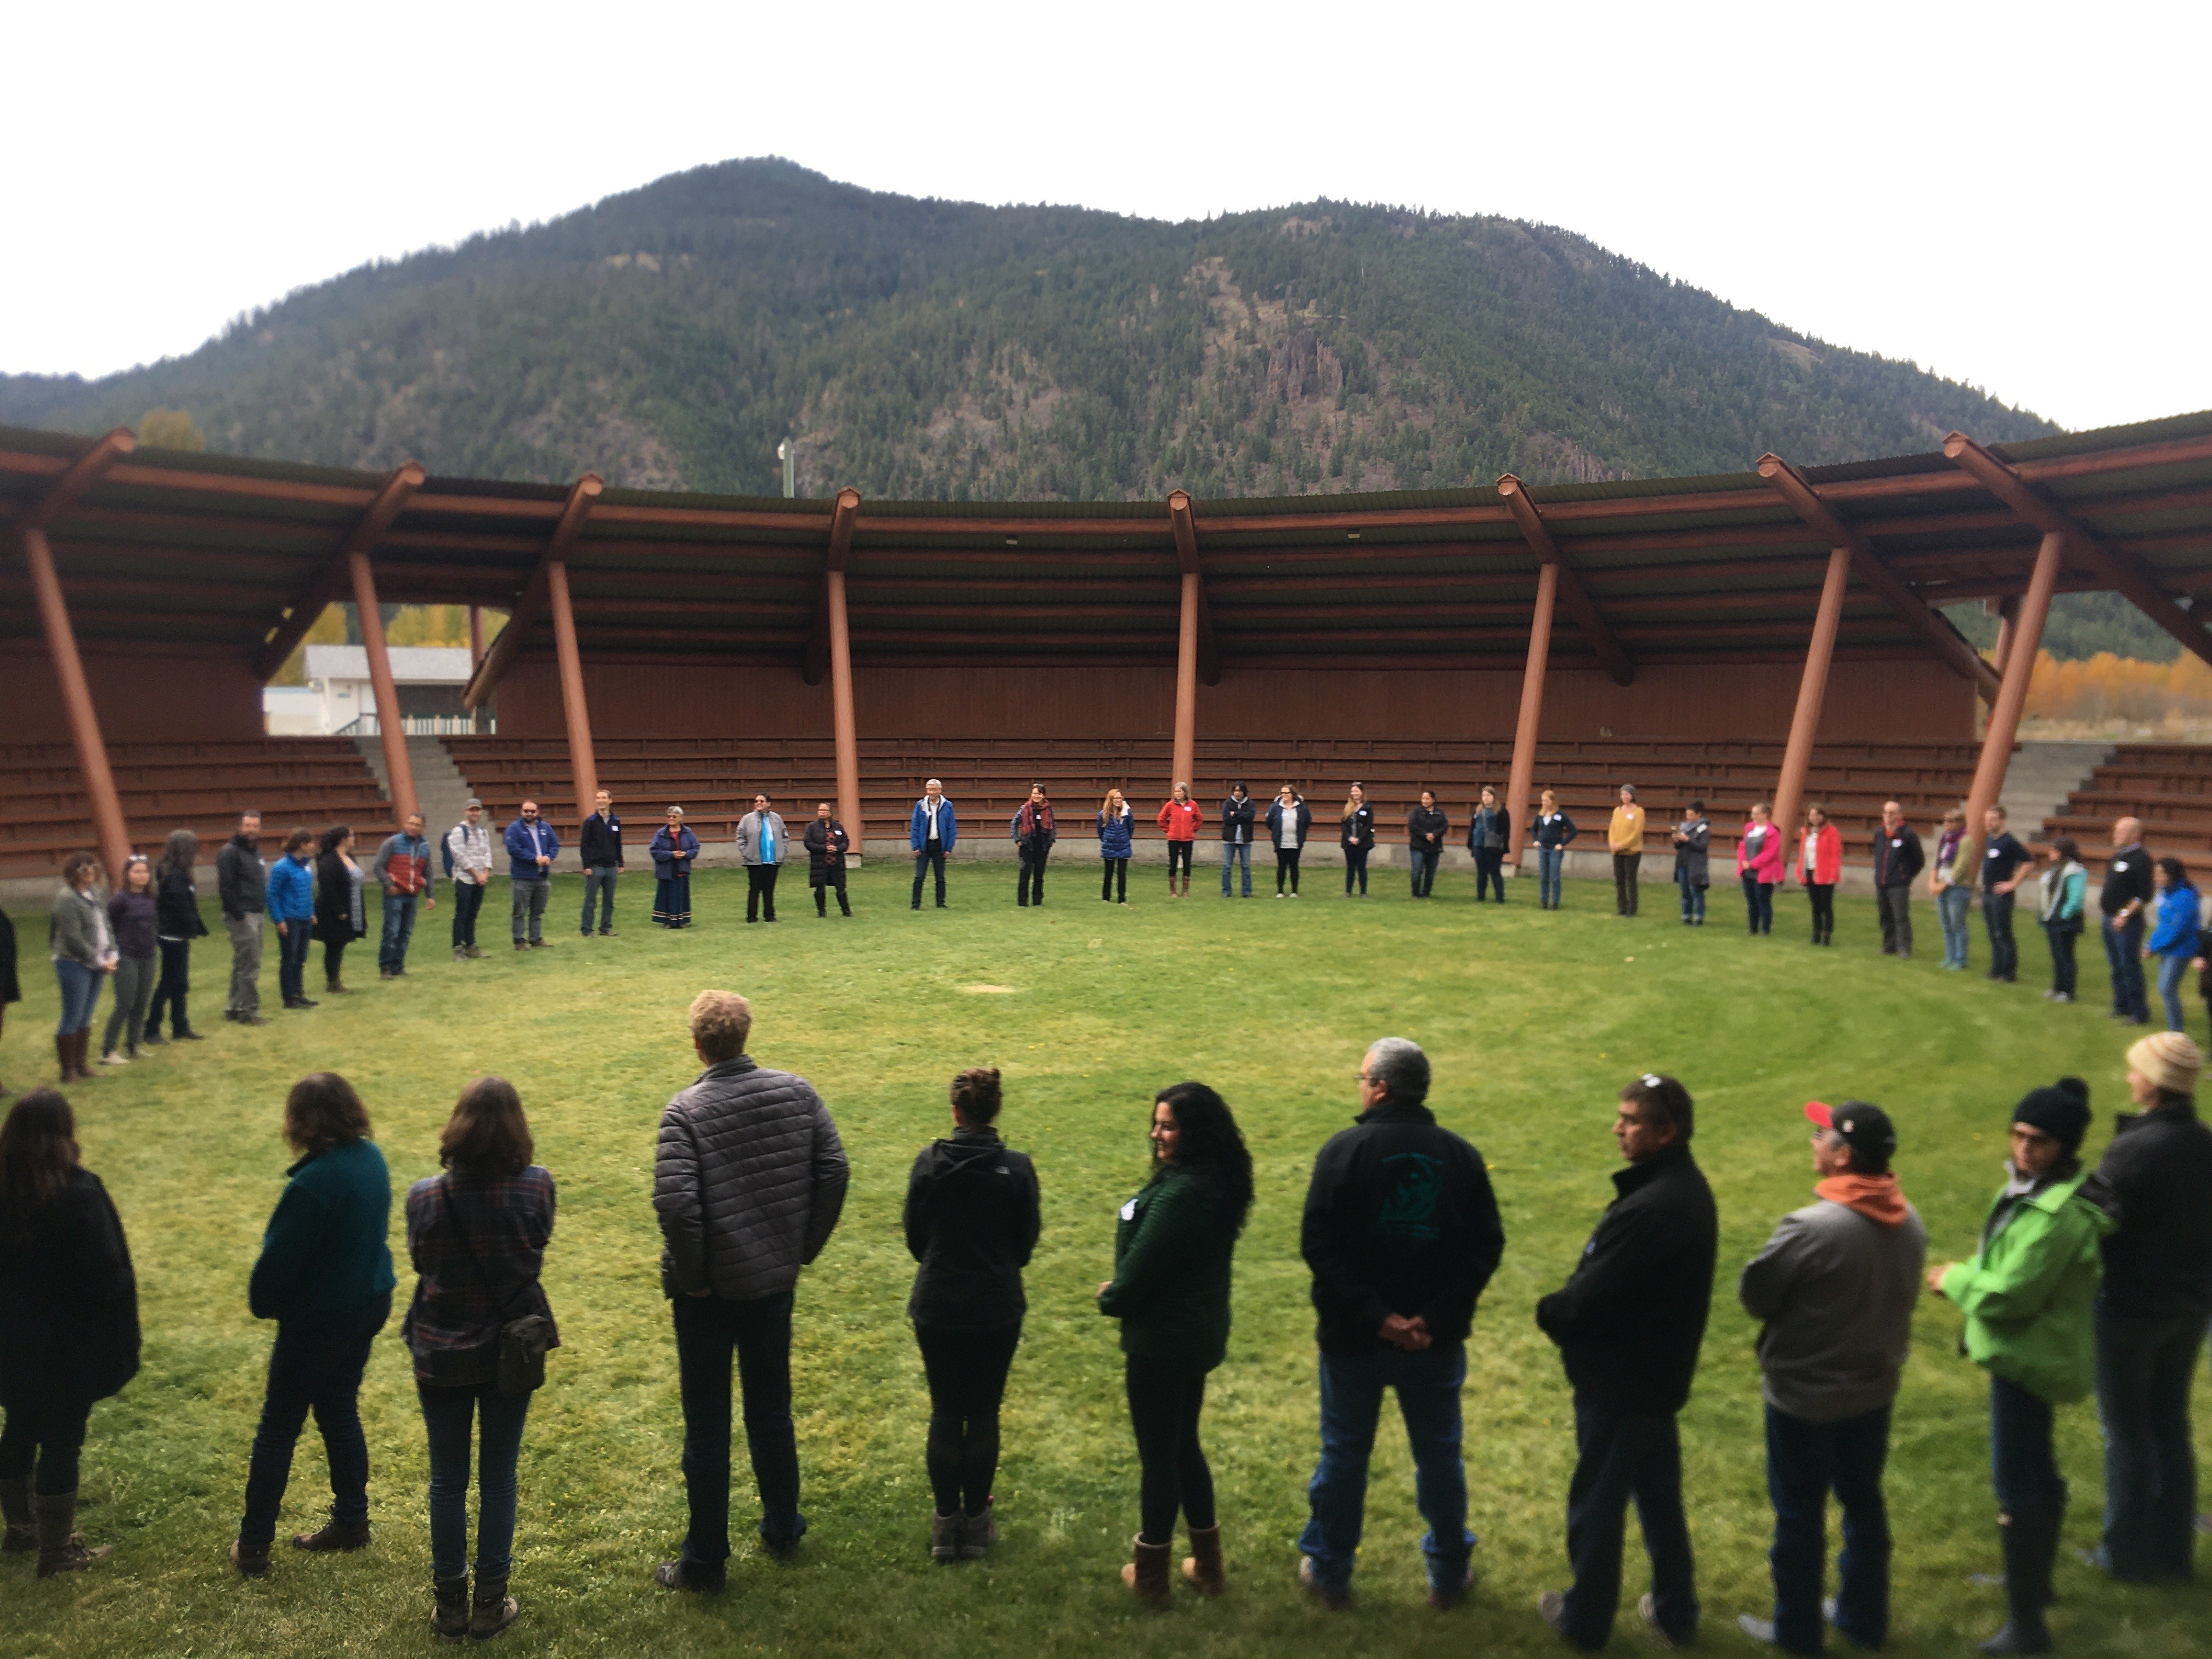 Provincial water management groups gathered on Nlaka'pamux First Nations territories in 2019 to build relationships.